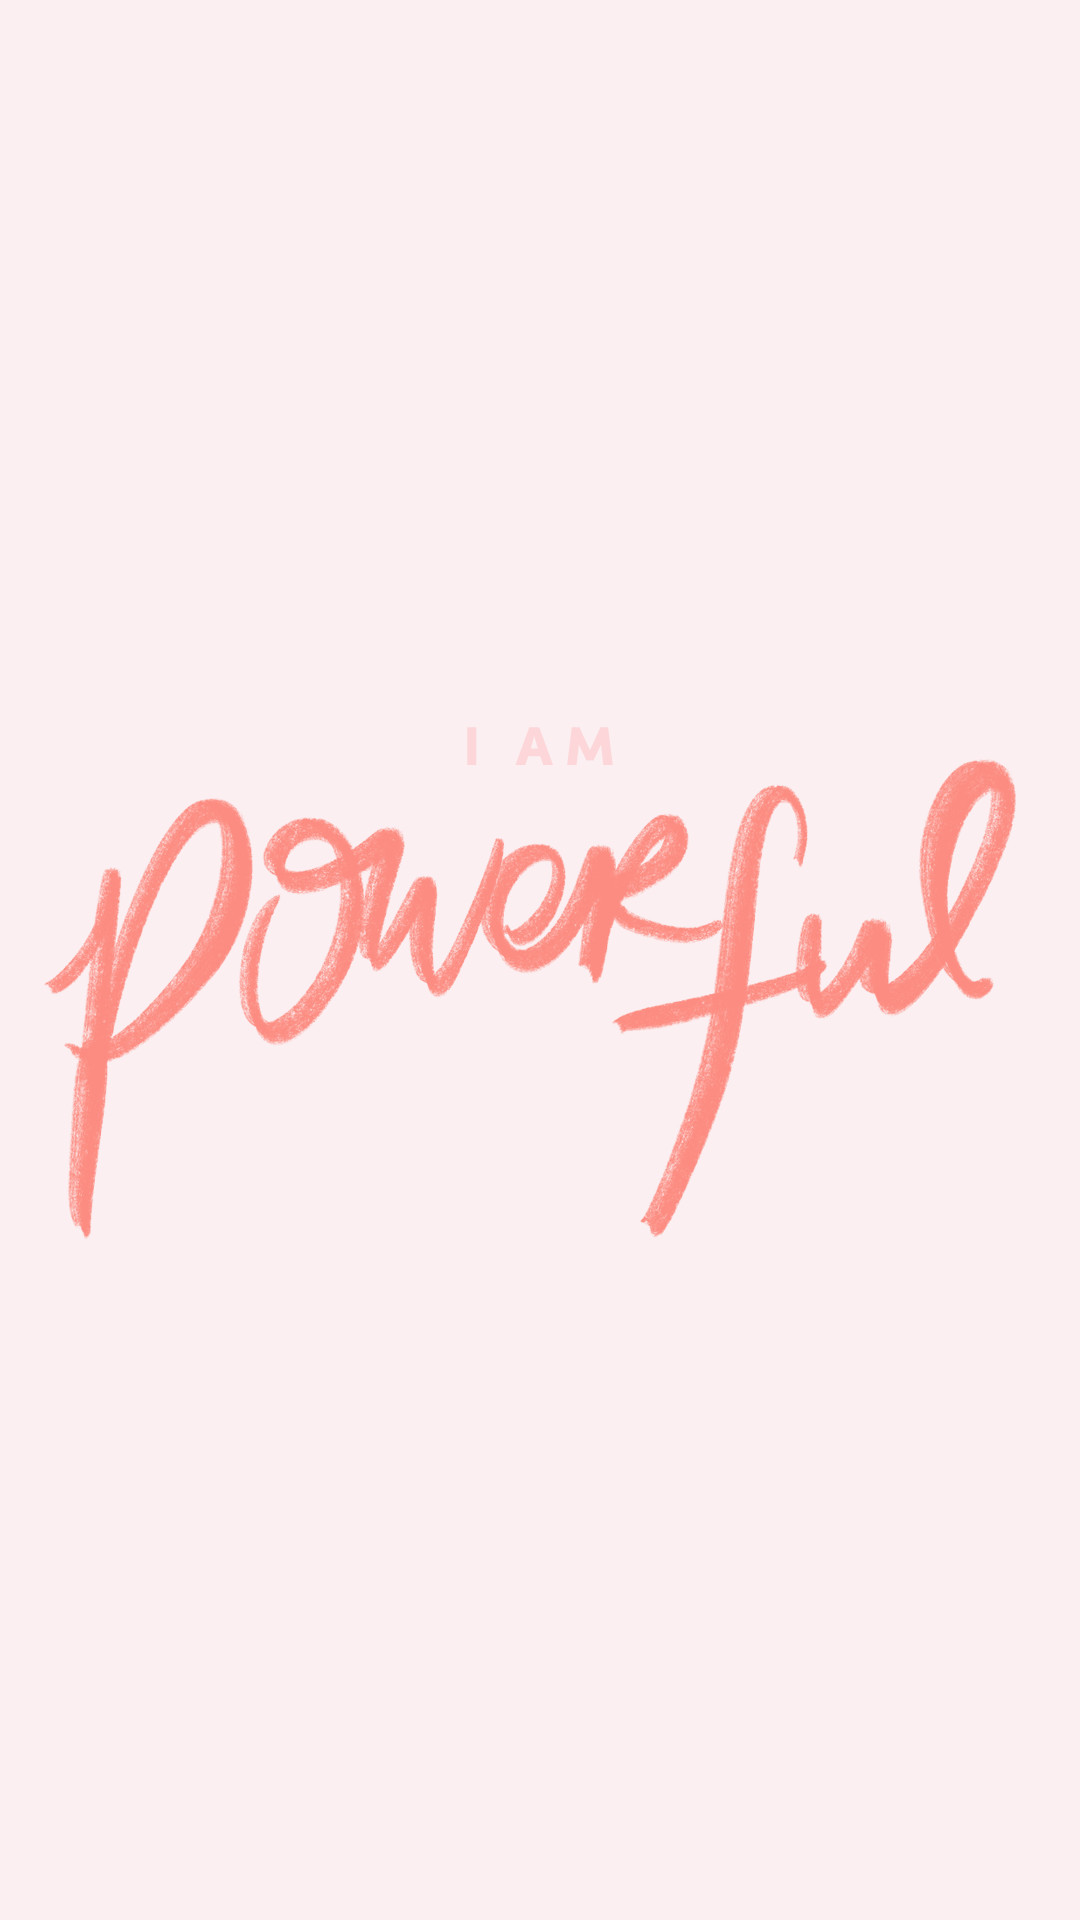 1080x1920 Tech Love 03: I Am Wallpapers ~ I Am Powerful // Free Wallpapers,  Downloads, IPhone Wallpapers, Affirmations, Typography